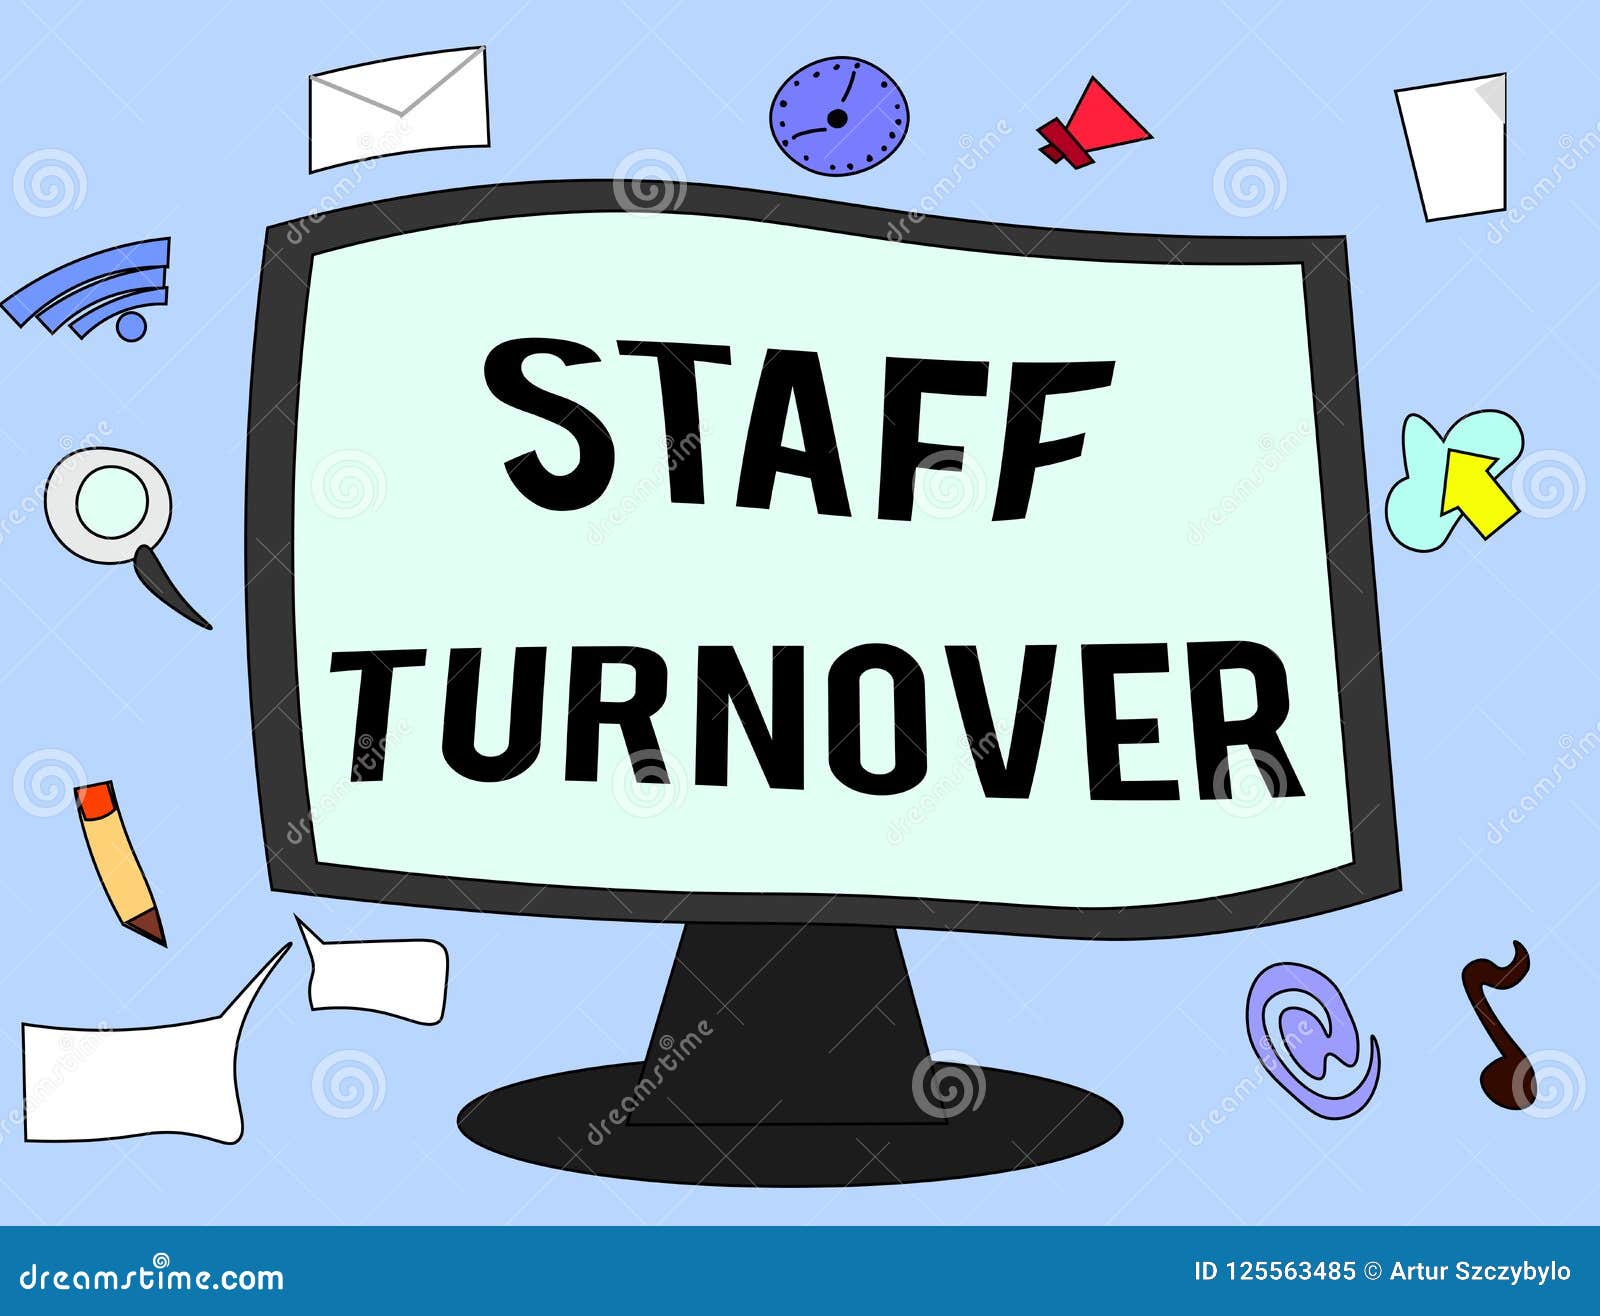 Turn over means. Staff turnover. Staff turnover картинка. Low staff turnover.